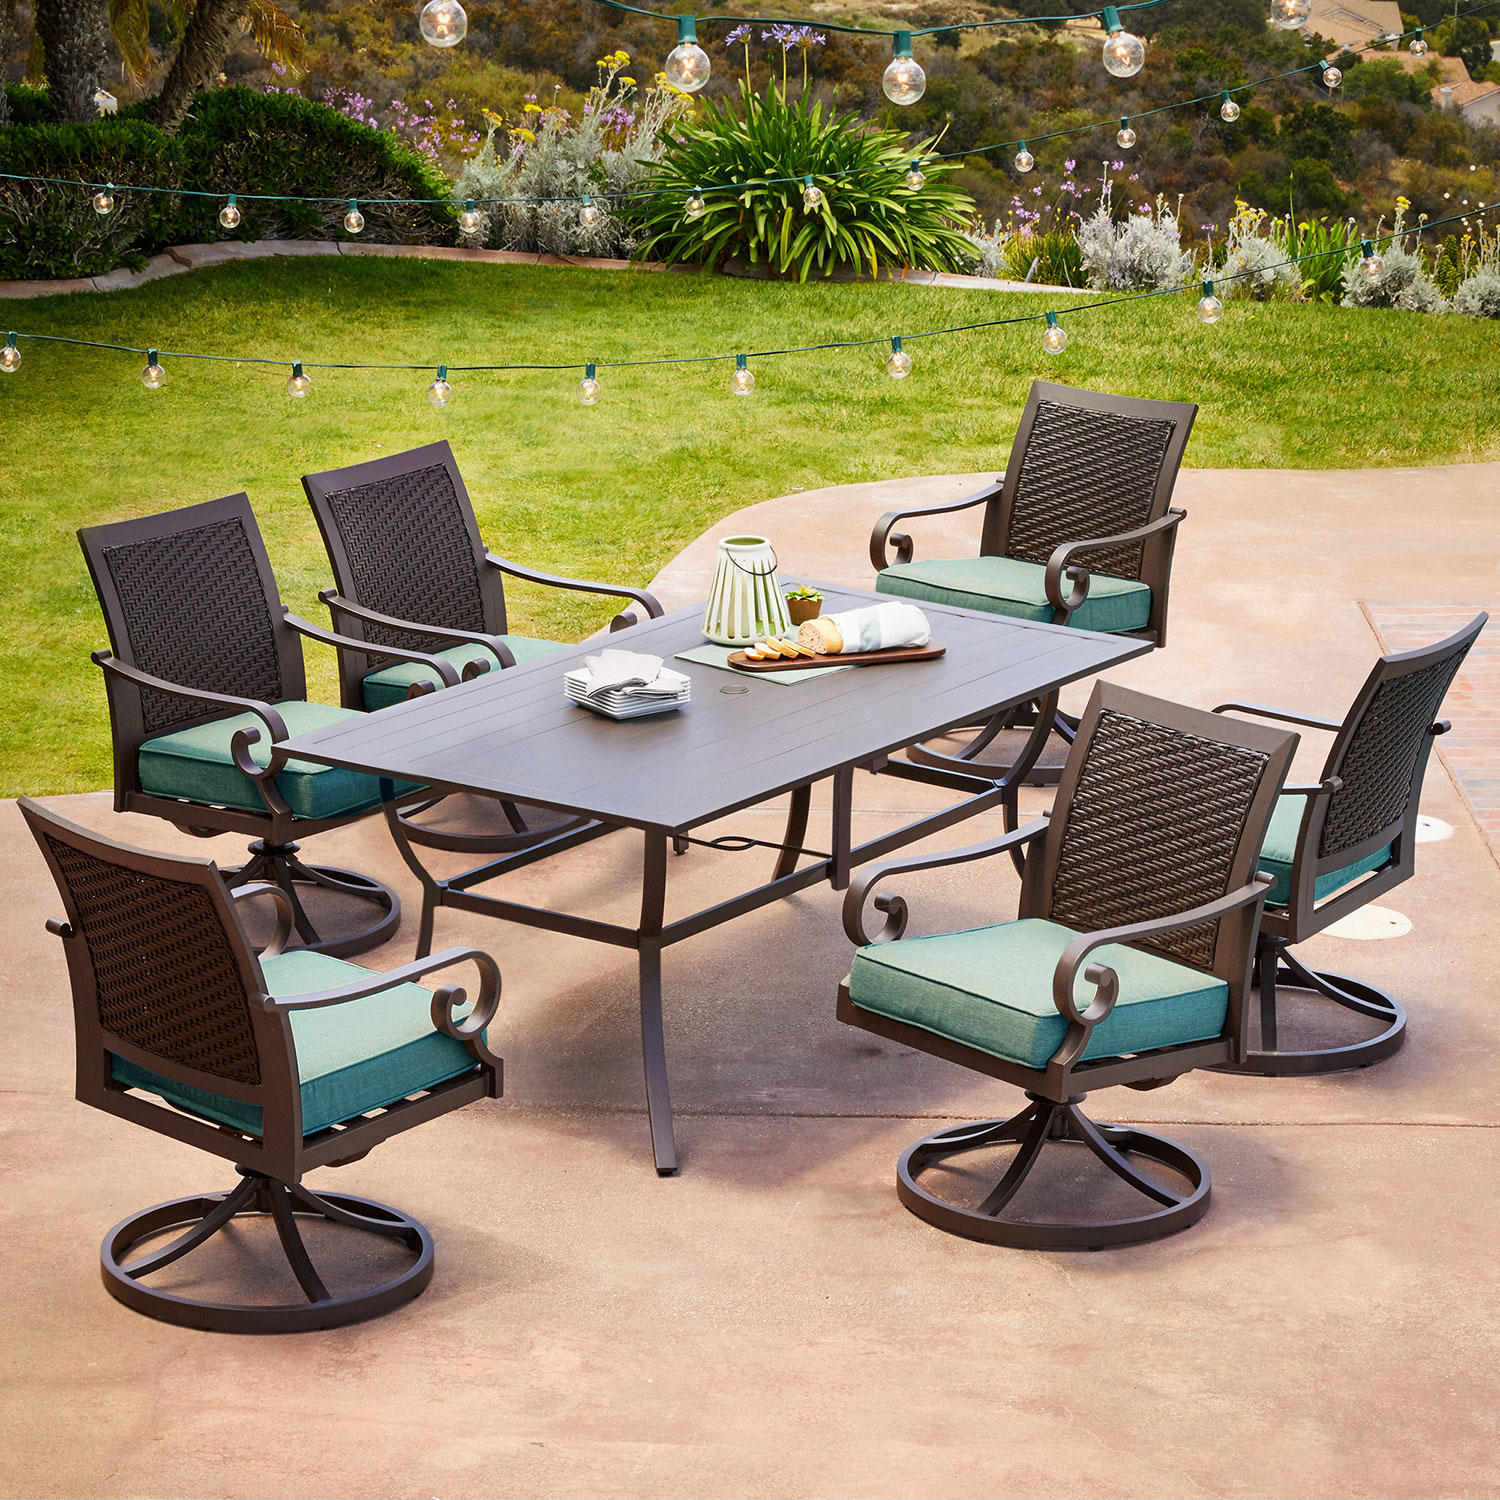 Royal Garden Monte Carlo 7-Piece Patio Dining Set with Swivel Dining Chairs